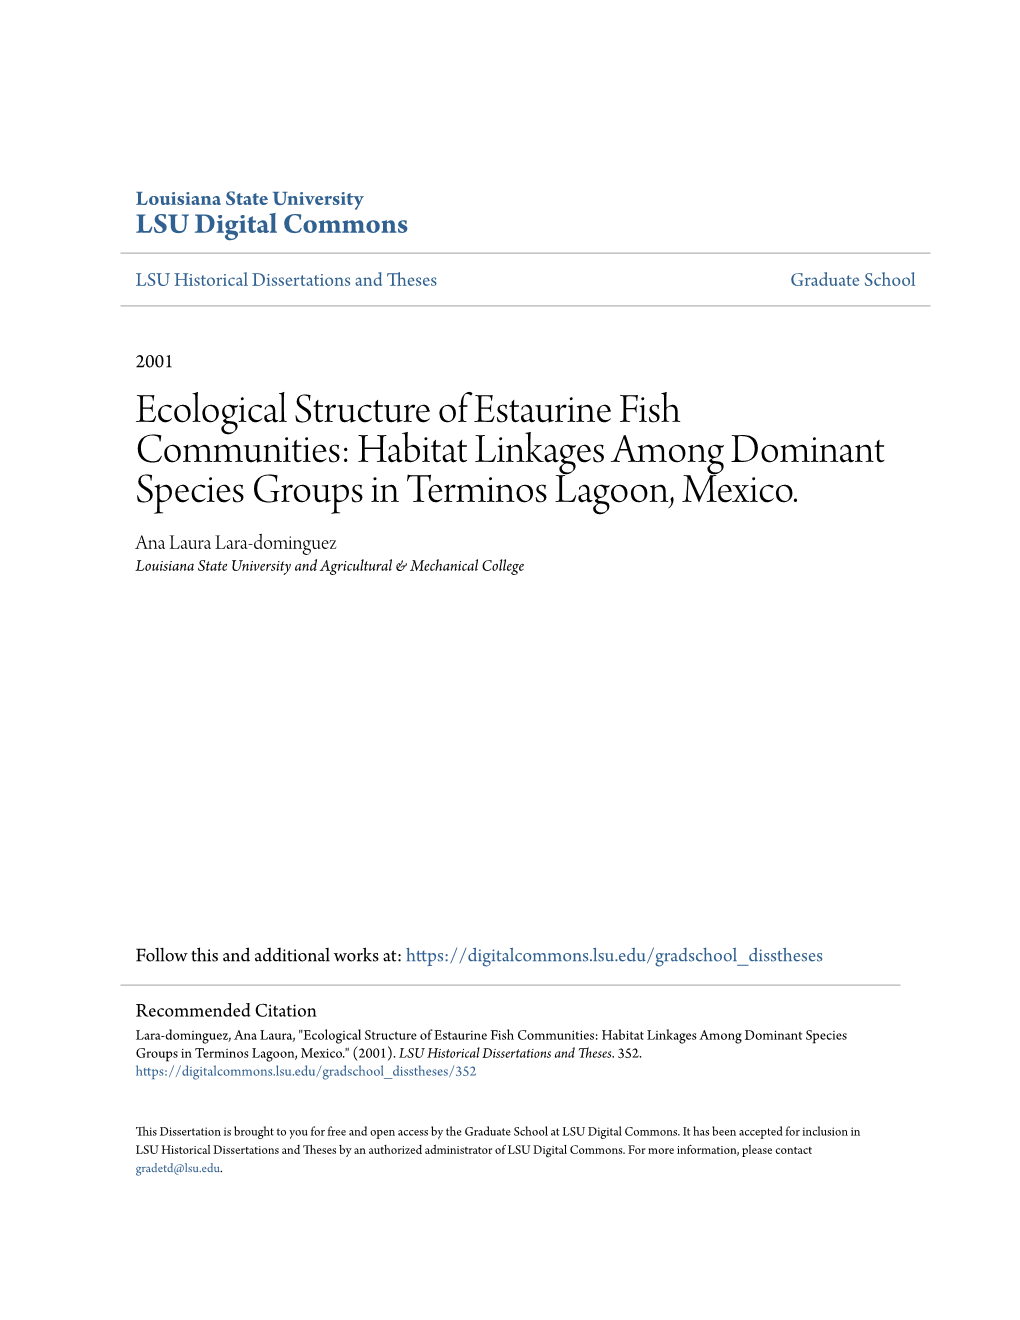 Ecological Structure of Estaurine Fish Communities: Habitat Linkages Among Dominant Species Groups in Terminos Lagoon, Mexico